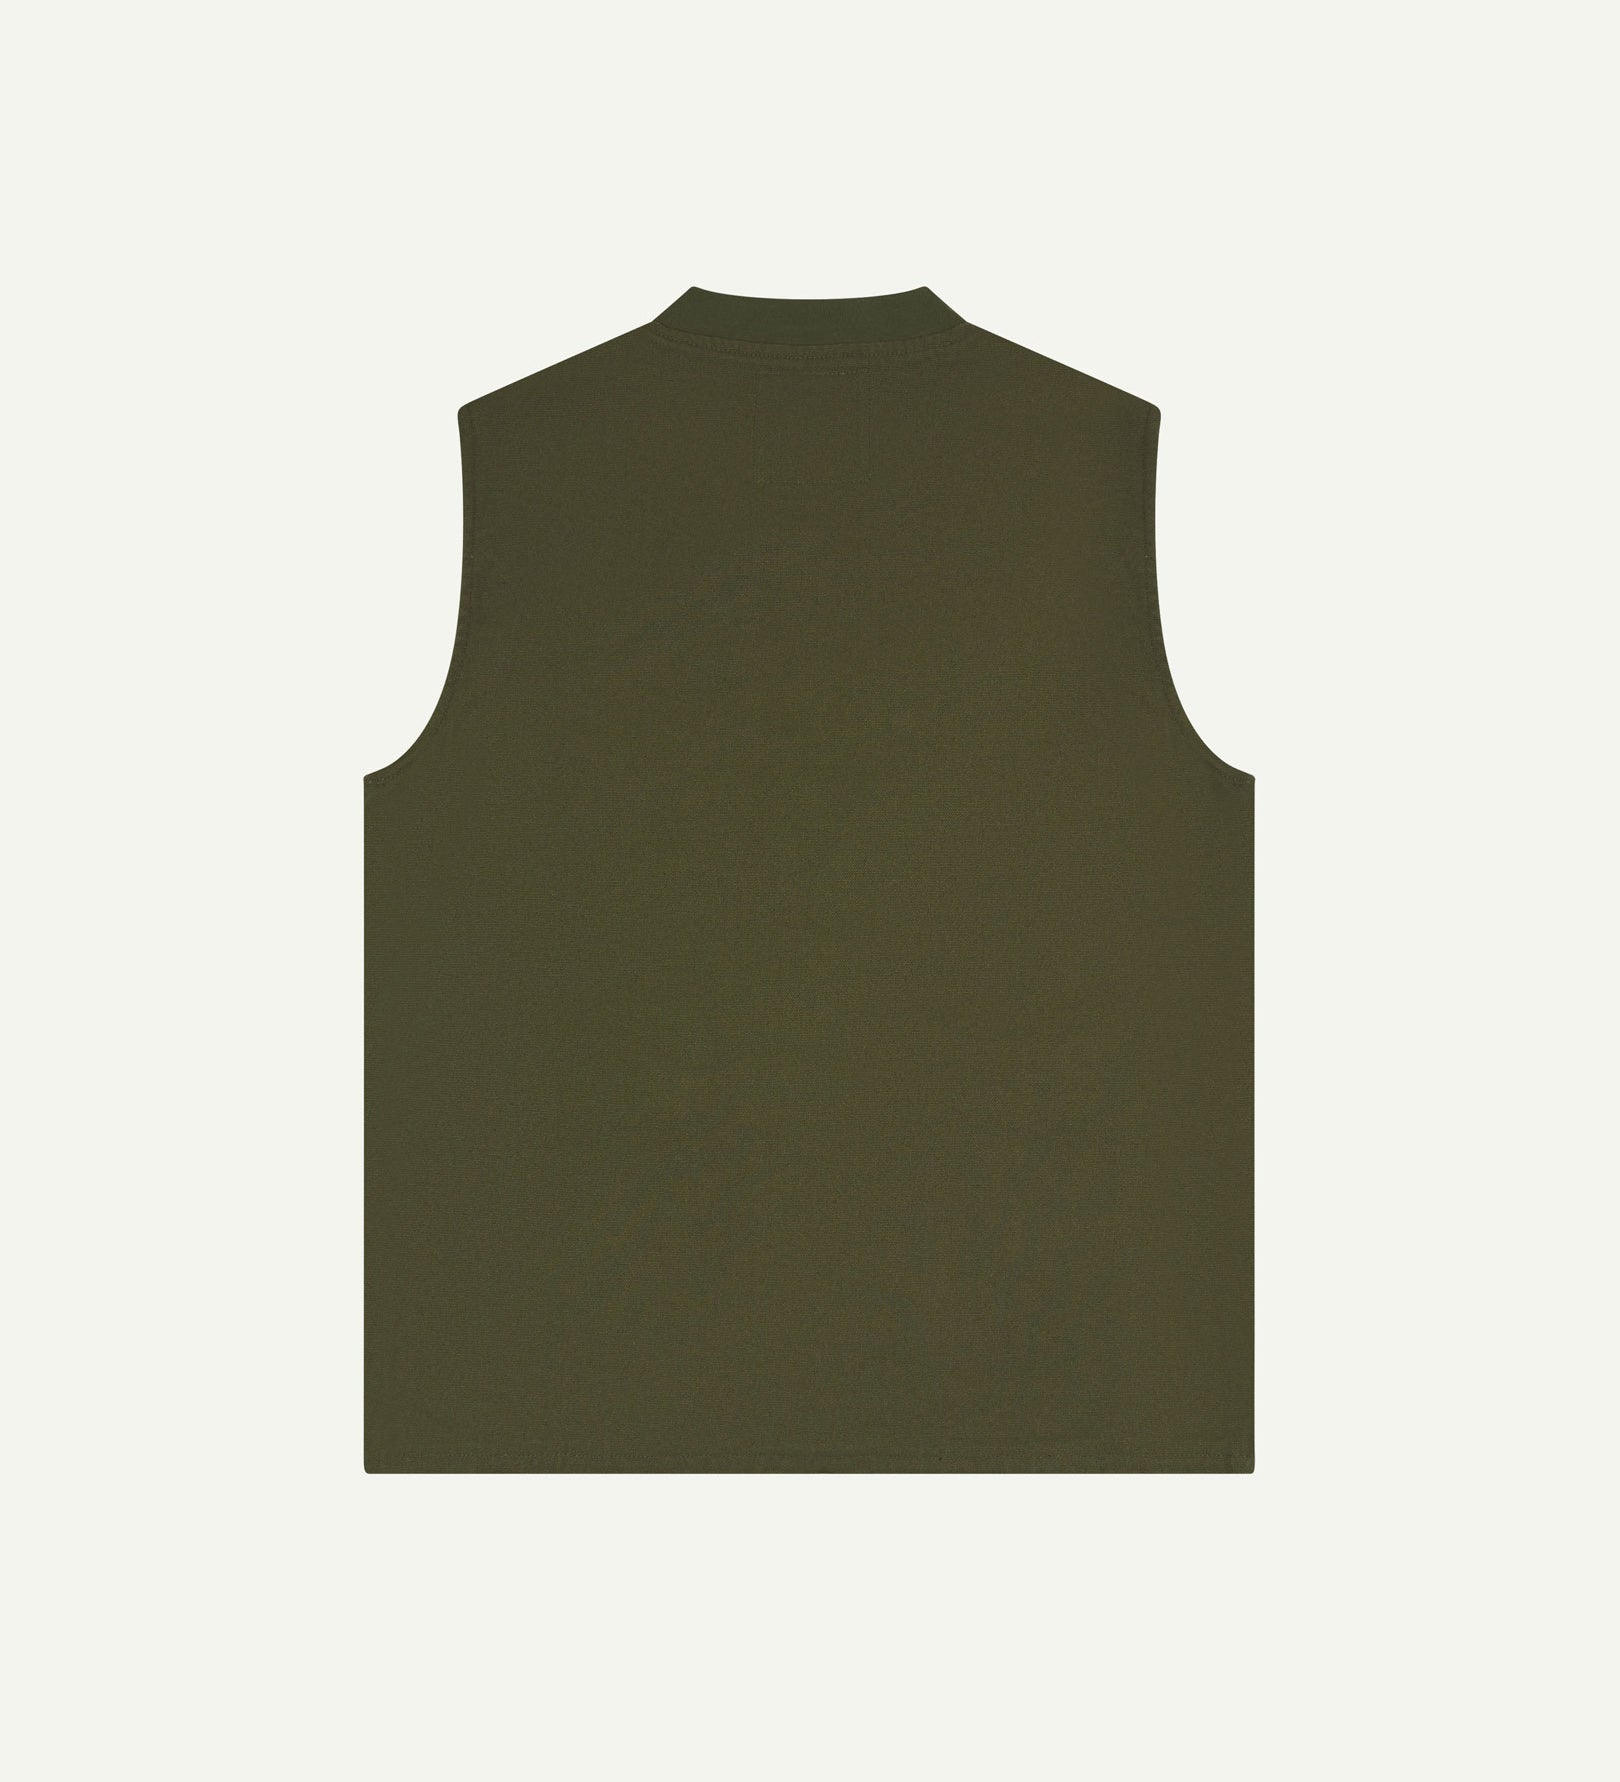 Back view of Uskees coriander-green gilet-style zip-front waistcoat, showing jersey cotton collar.